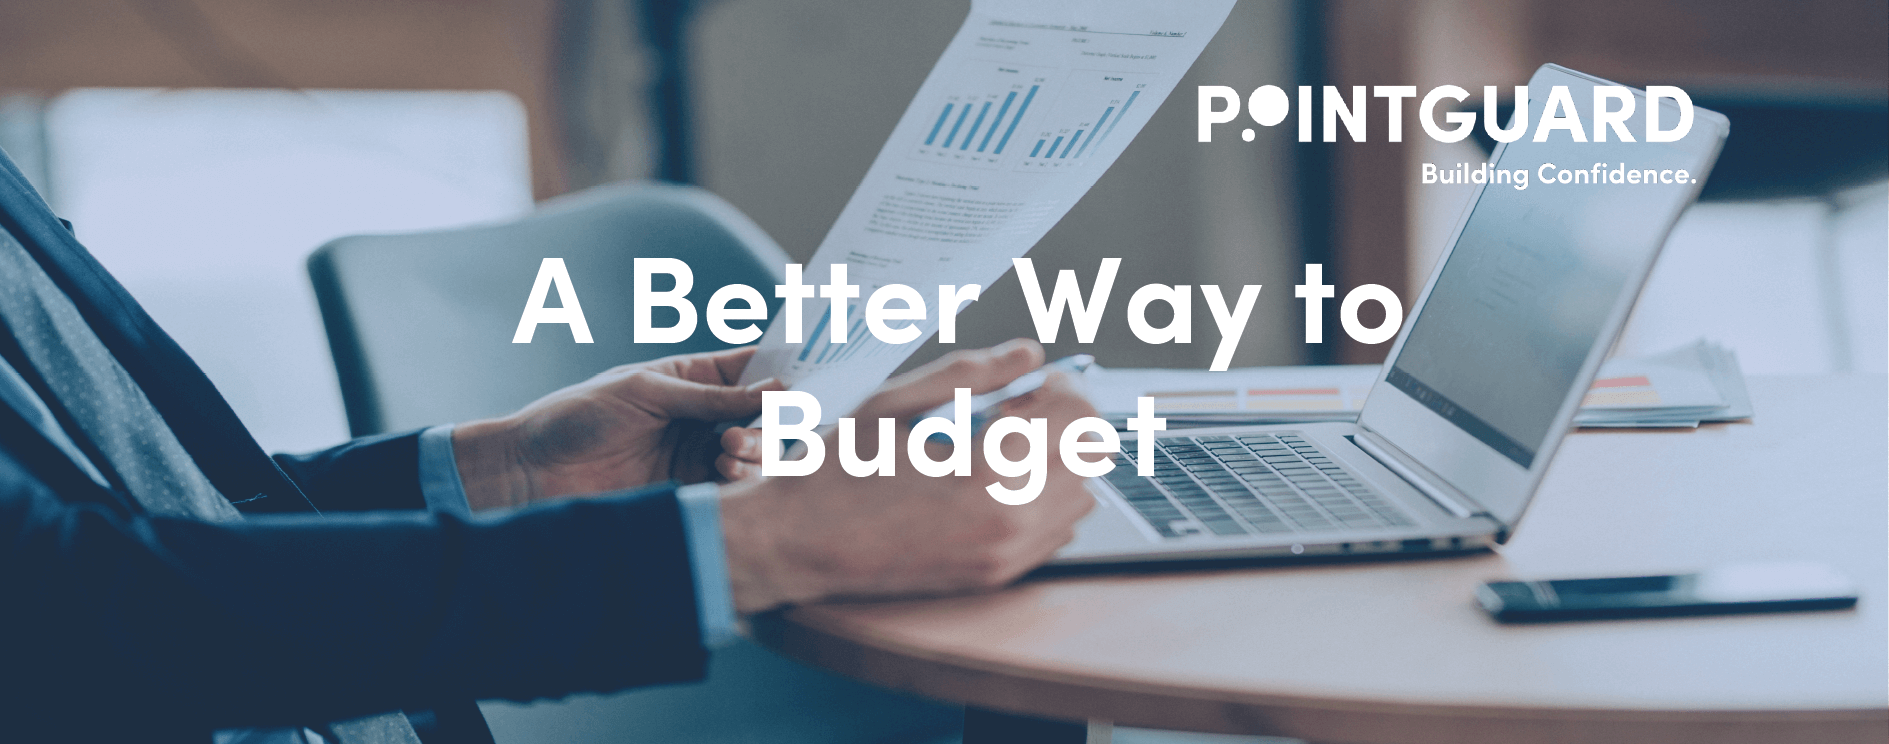 A Better Way to Budget